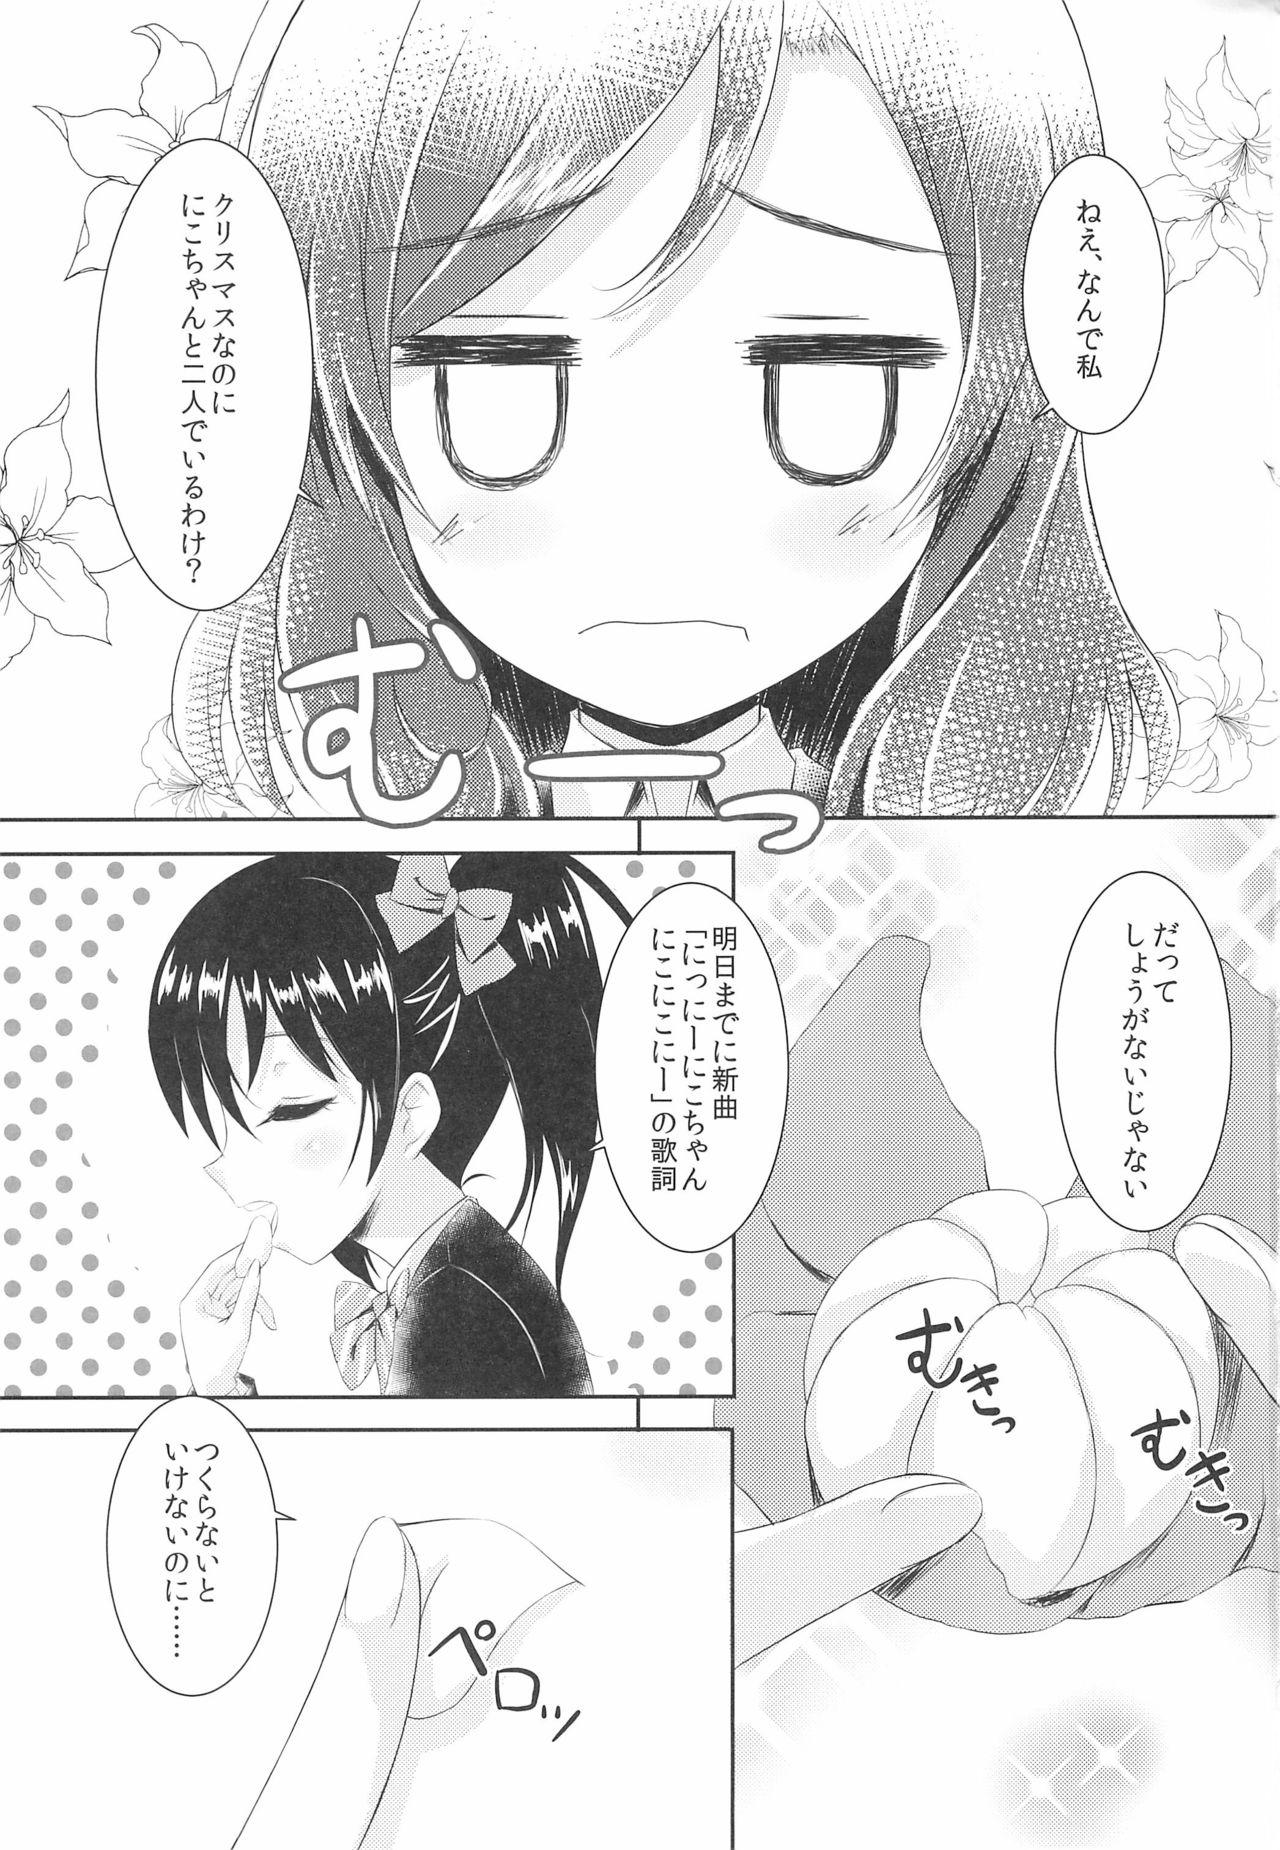 Old And Young NicoMaki MIKAN Winter - Love live Camera - Page 3